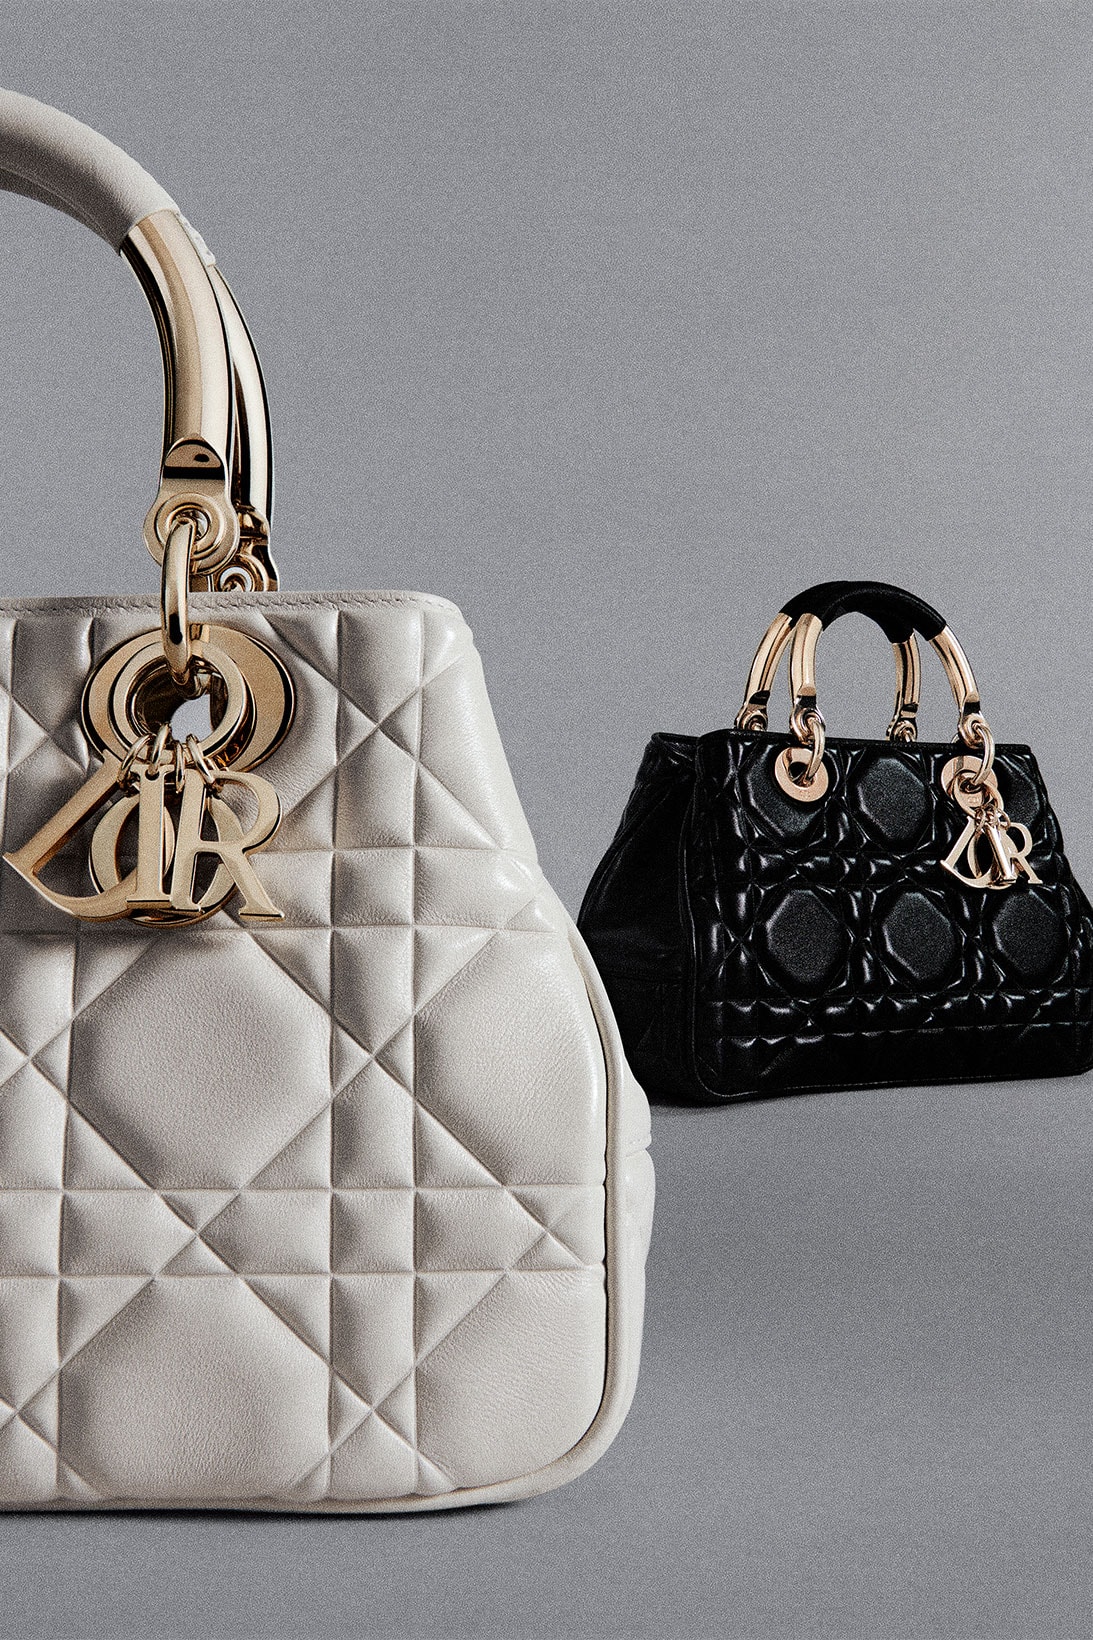 Top 7 Dior Bags to Buy in 2023 